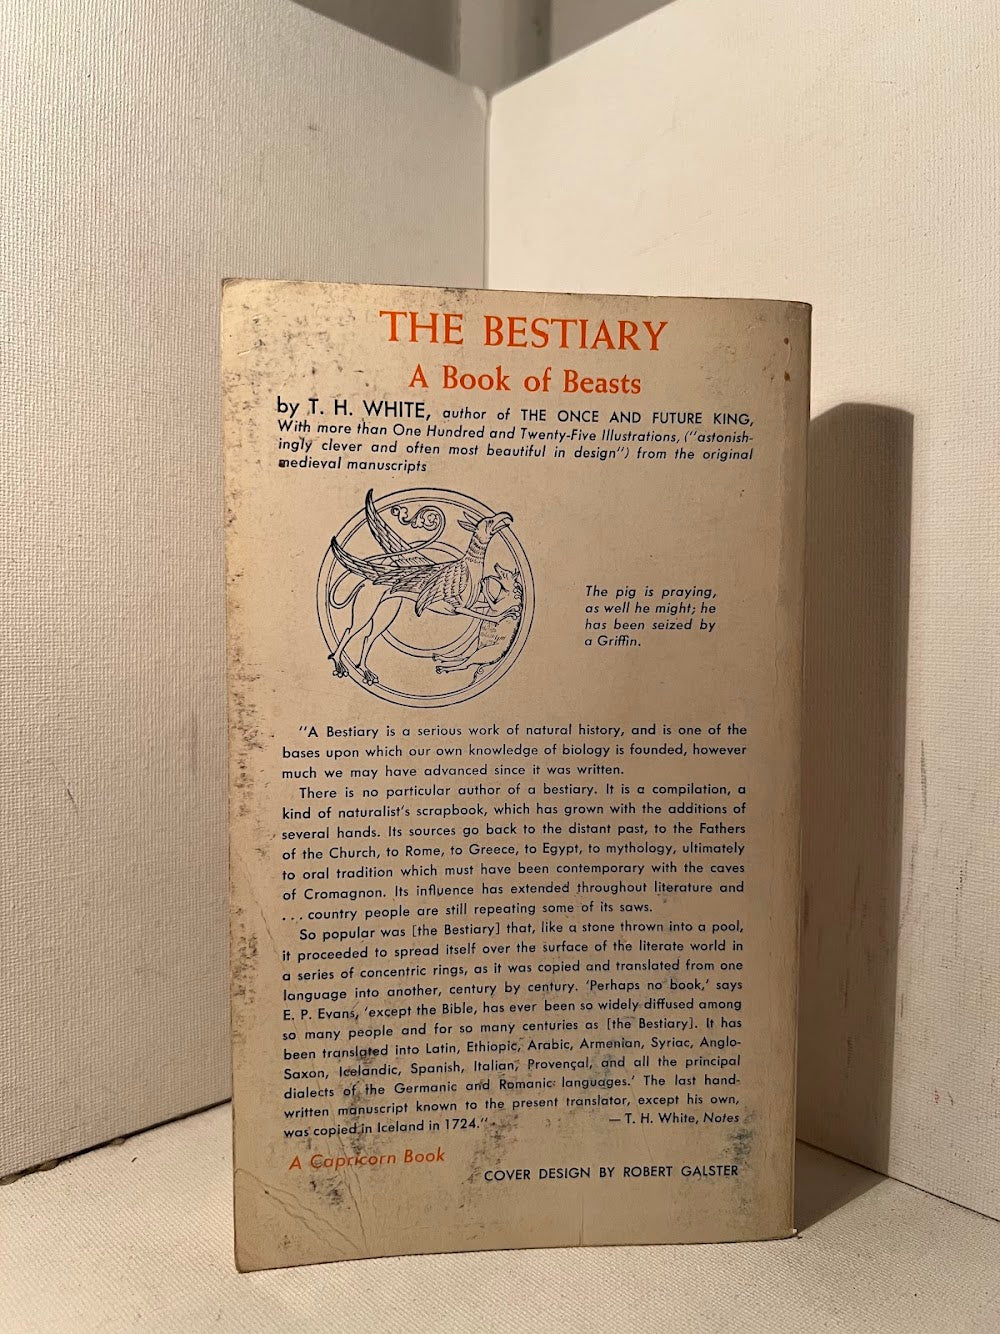 The Bestiary: A Book of Beasts by T.H. White